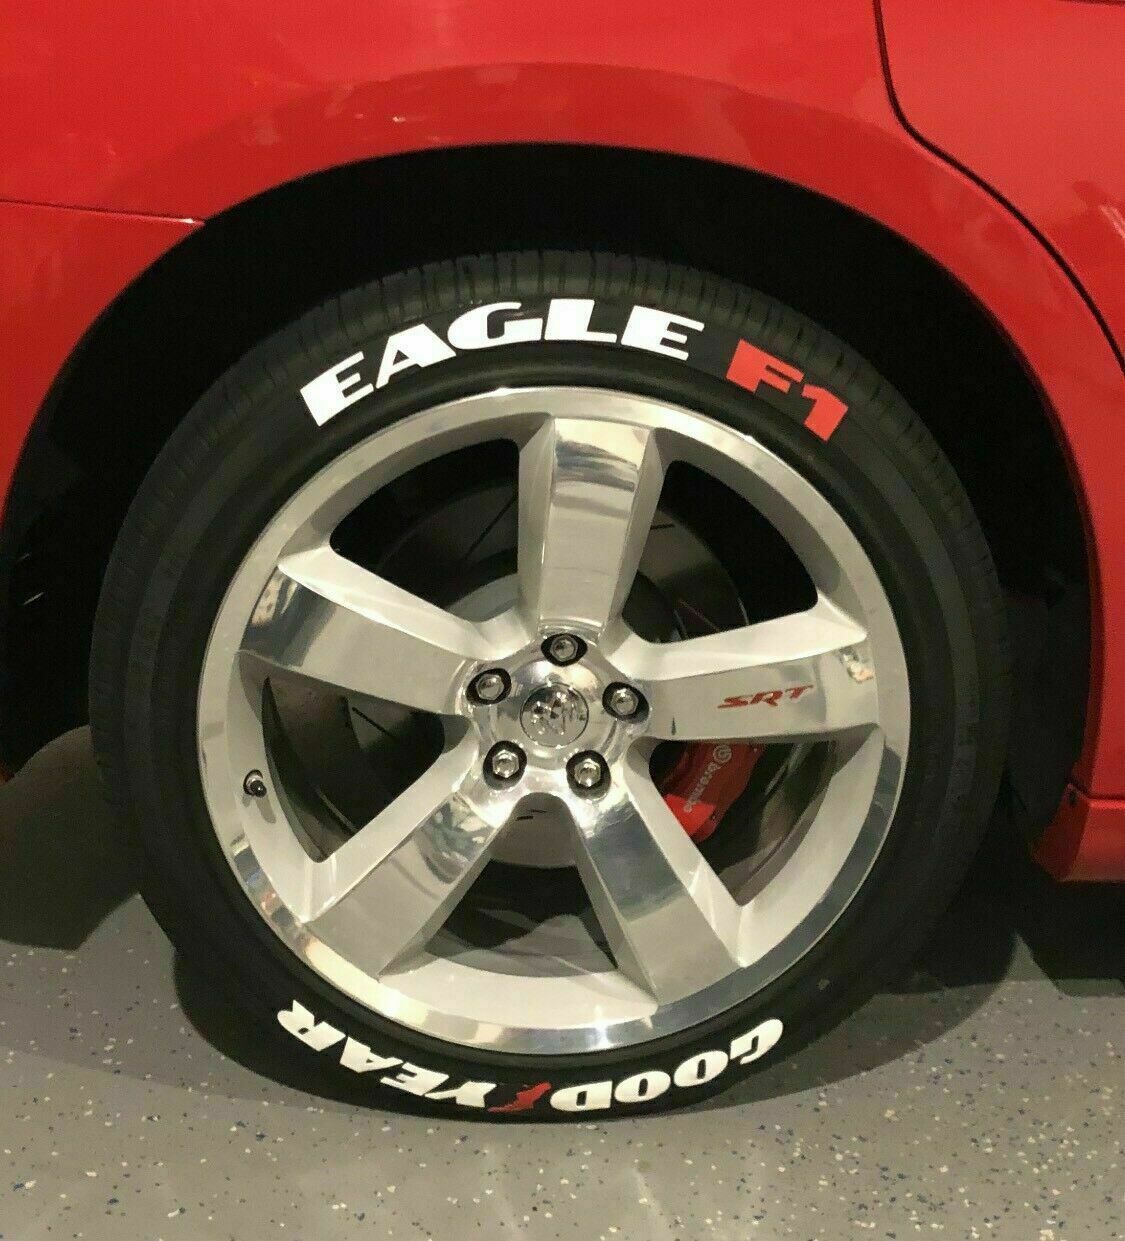 Permanent Tire Lettering Stickers Good Year Eagle F1 4 wheels 1.25" for 14"to 24